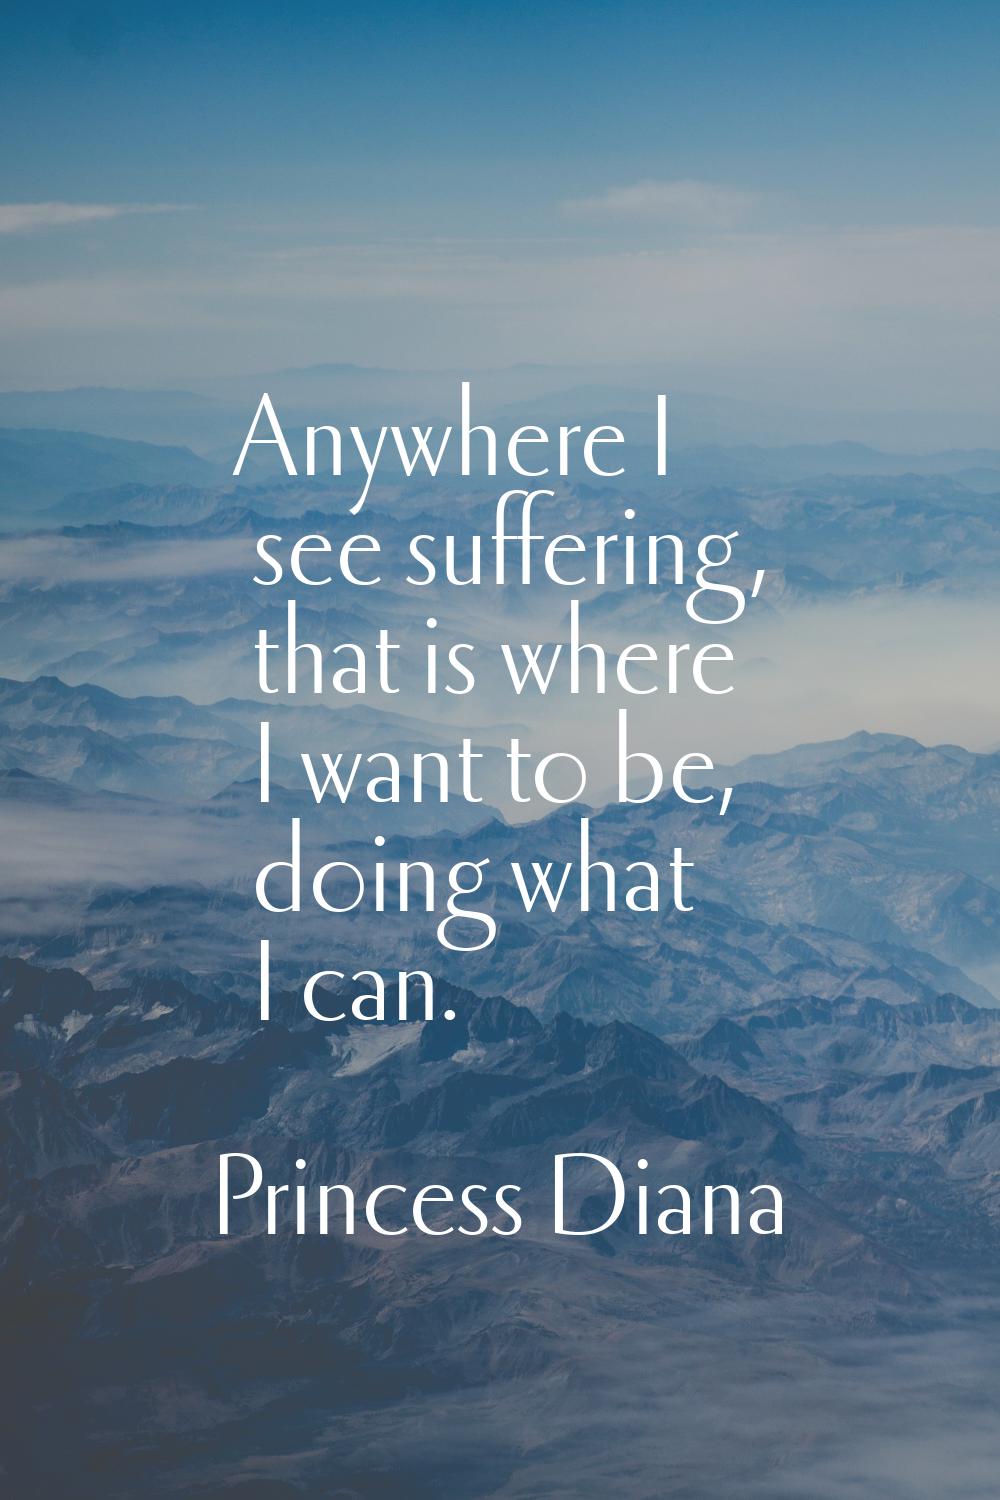 Anywhere I see suffering, that is where I want to be, doing what I can.